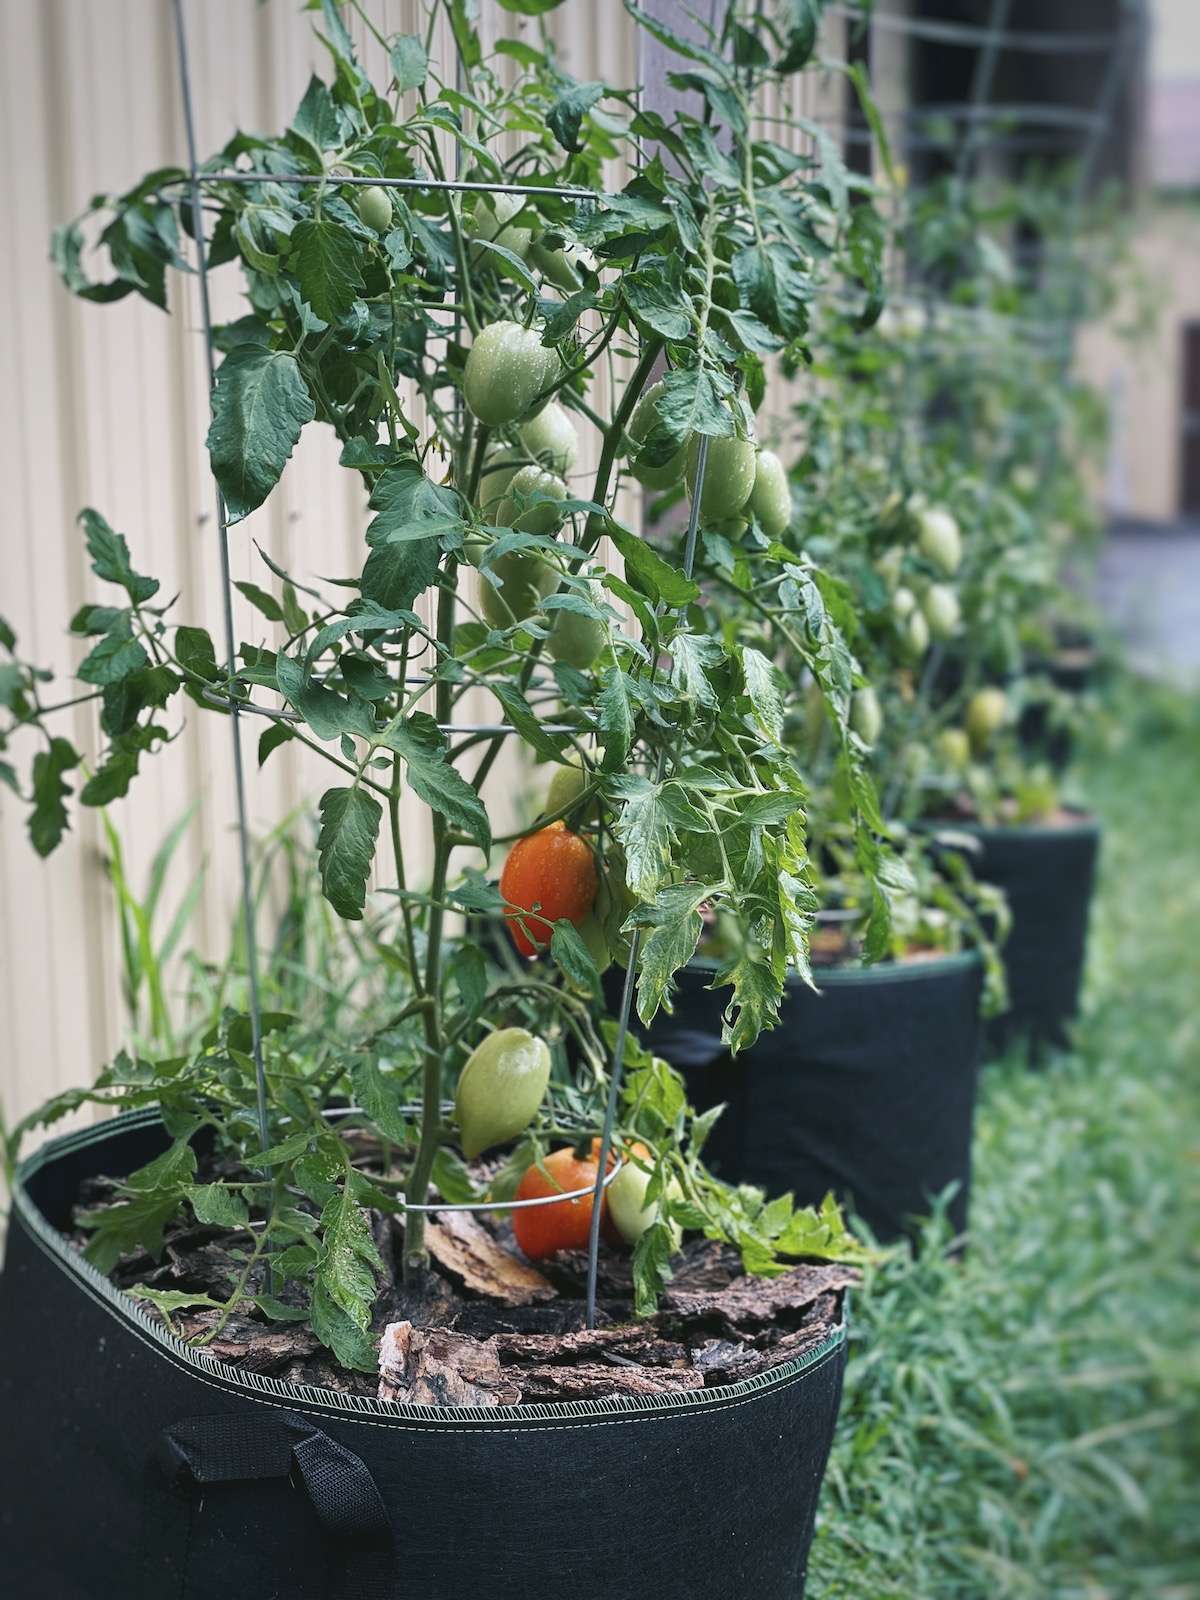 6 Simple Tips for Caring for Your Tomato Seedlings